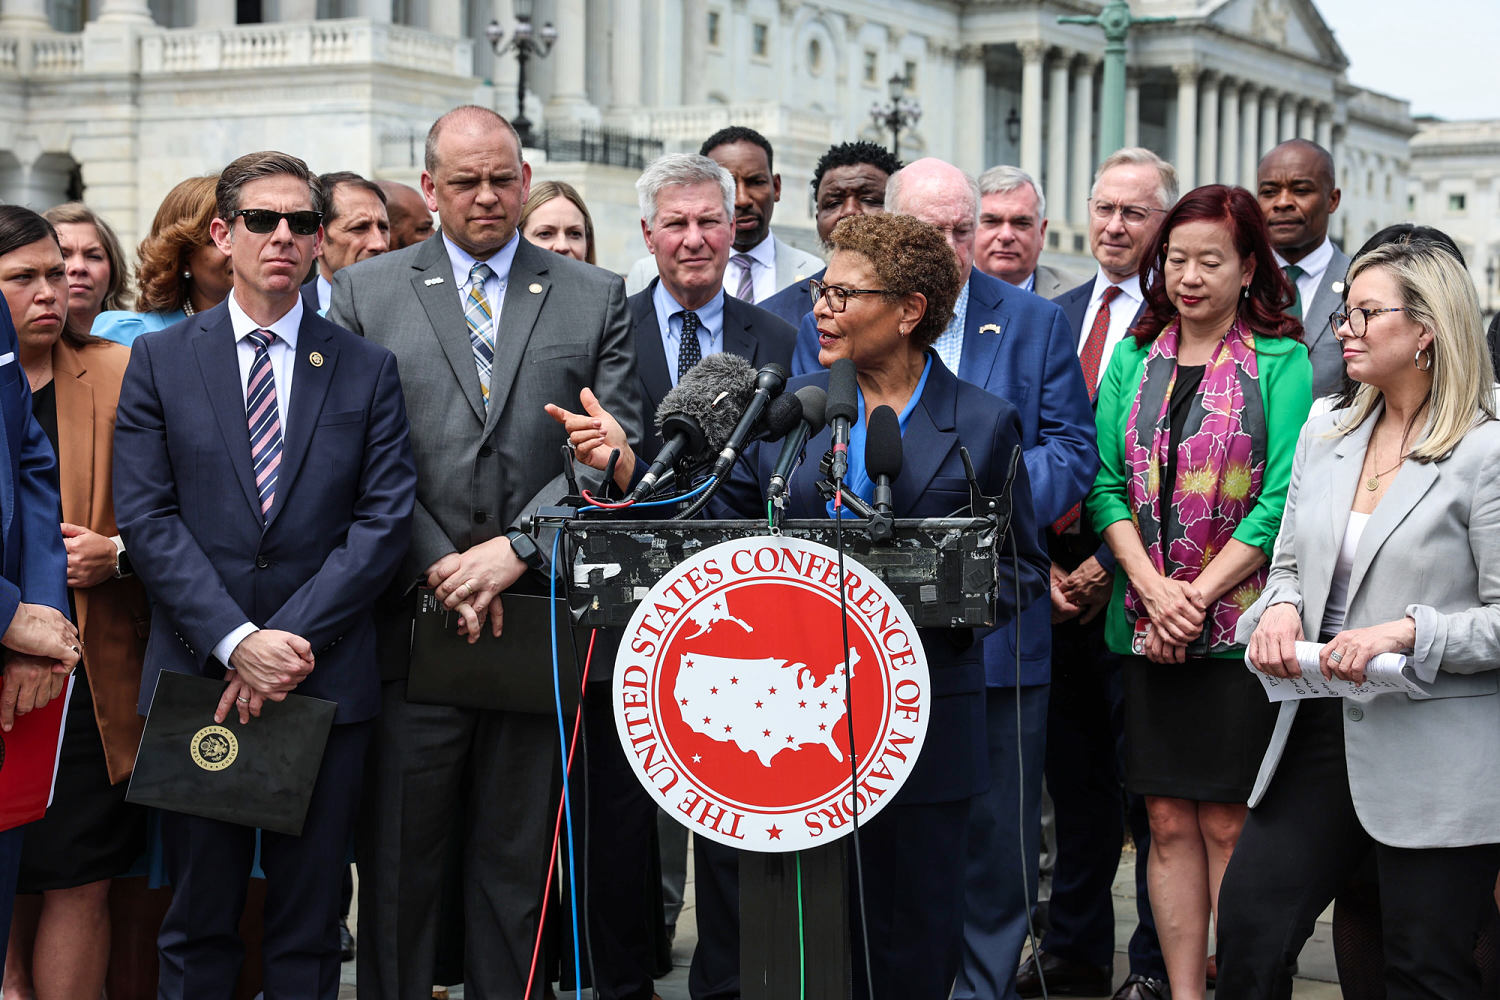 karen bass aims to reverse l.a.’s — and the nation’s — decadeslong struggle with homelessness